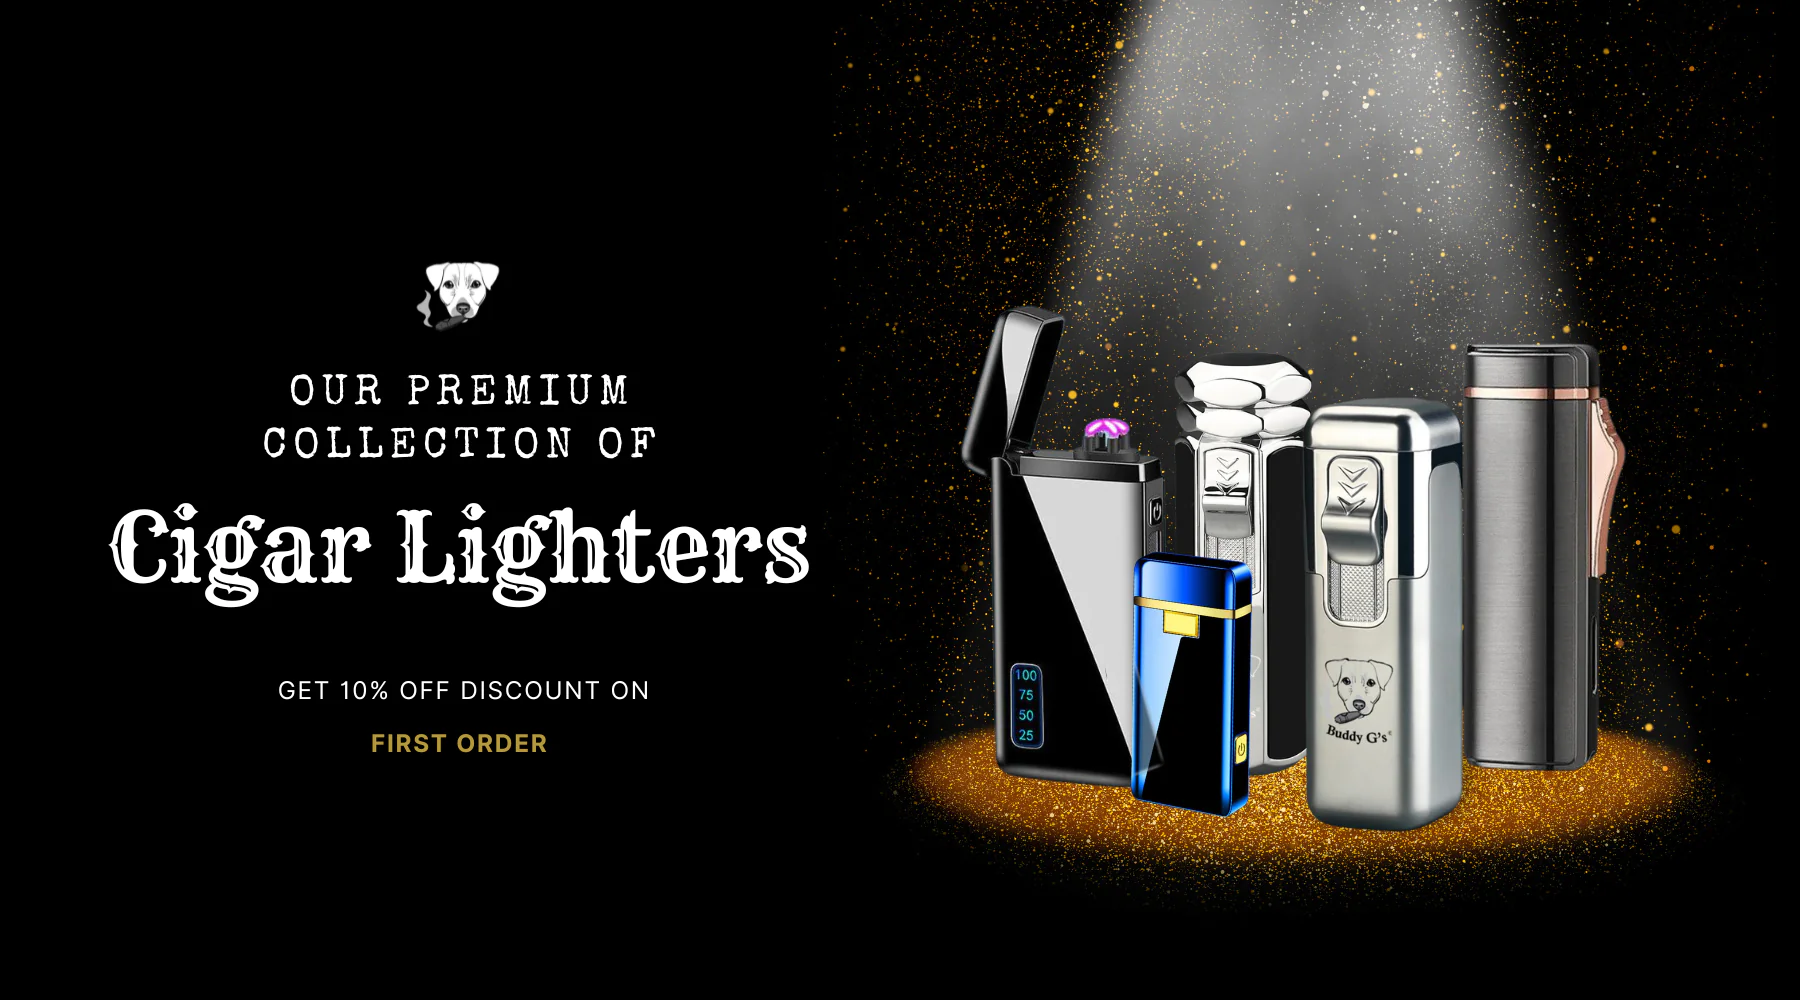 The Vintage Lighter — Introducing Our Premium Collection Of Cigar Lighters